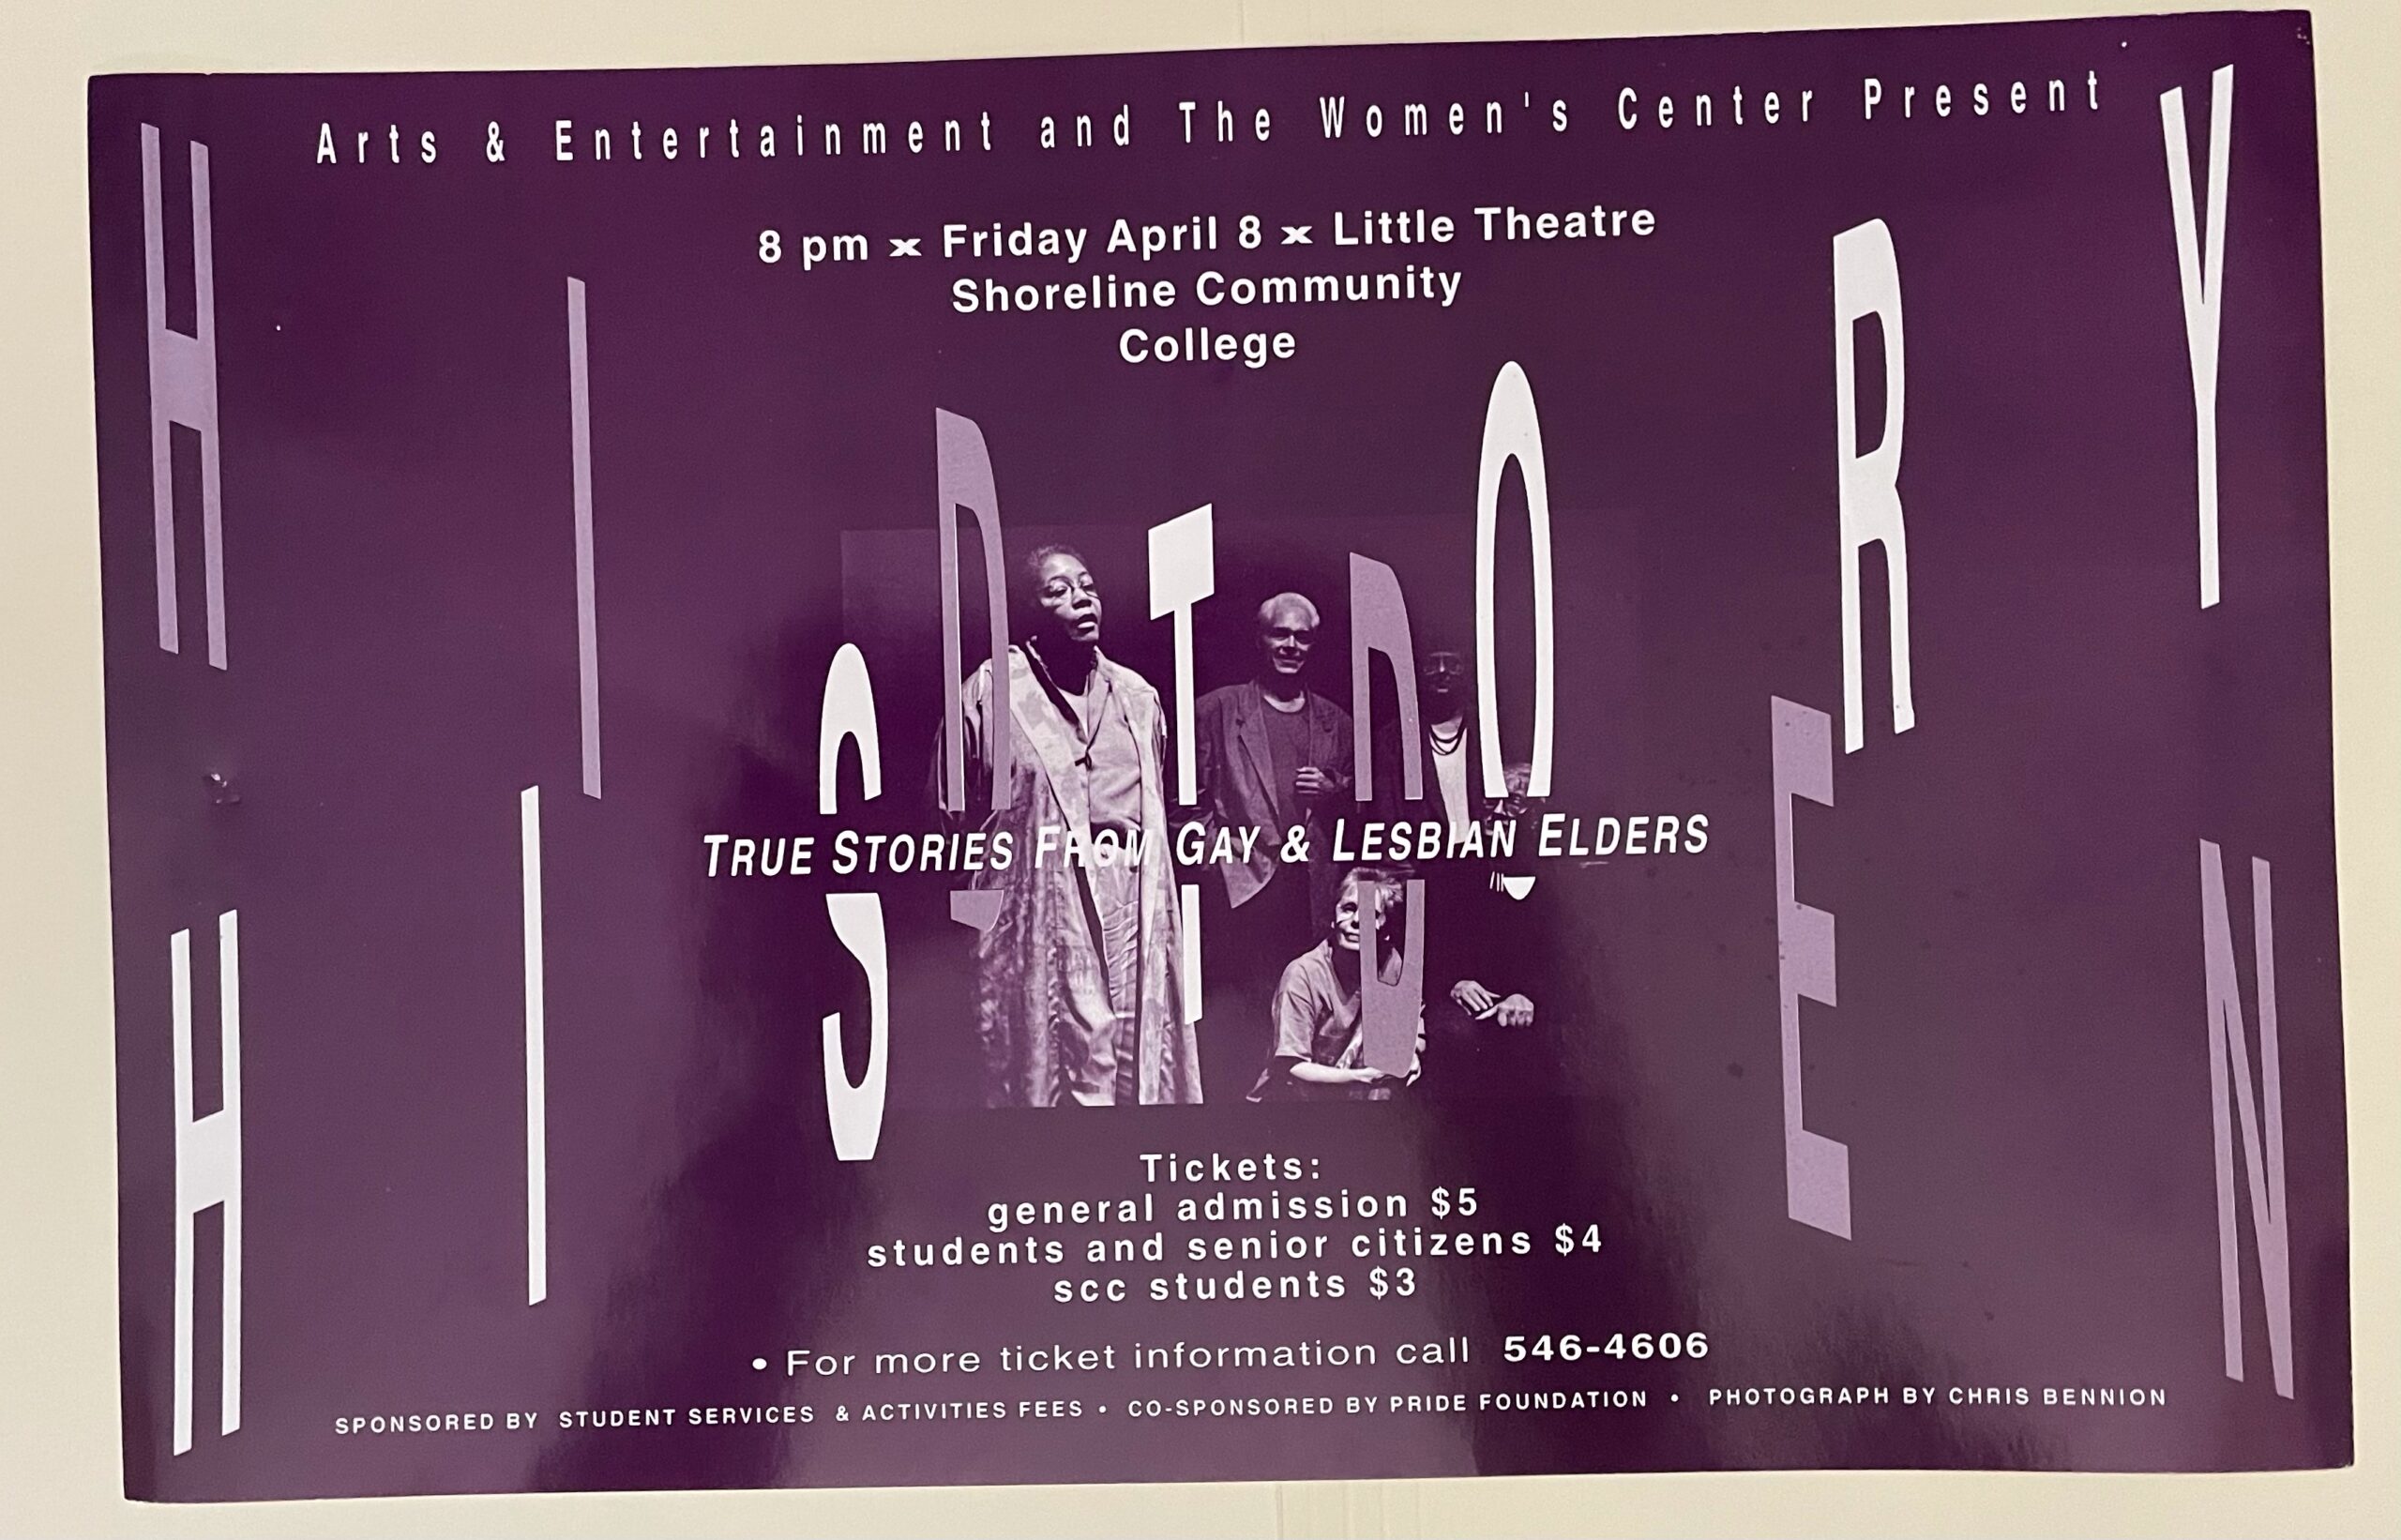 Photo of the poster for the "Hidden History" performance at Shoreline Community College on April 8th, 1994